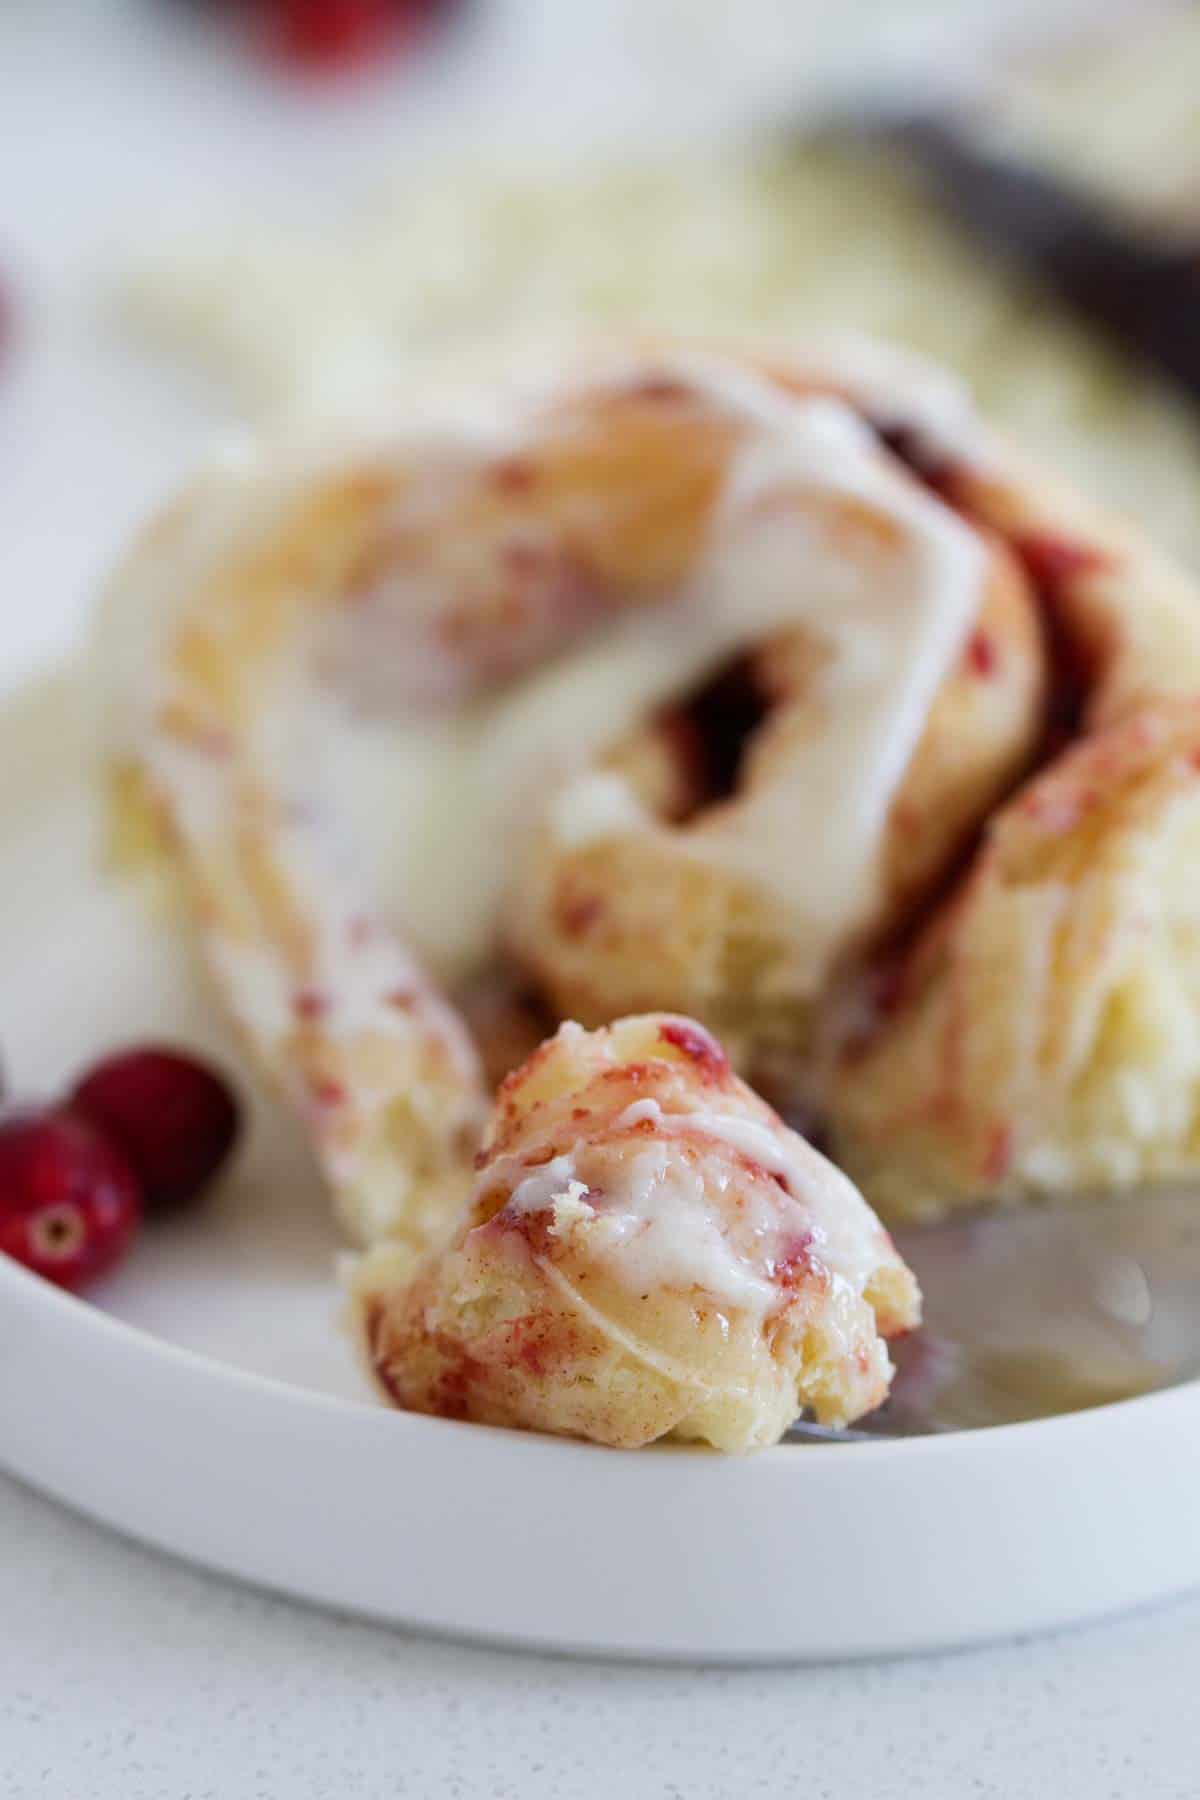 part of cranberry cinnamon roll pulled off to show interior